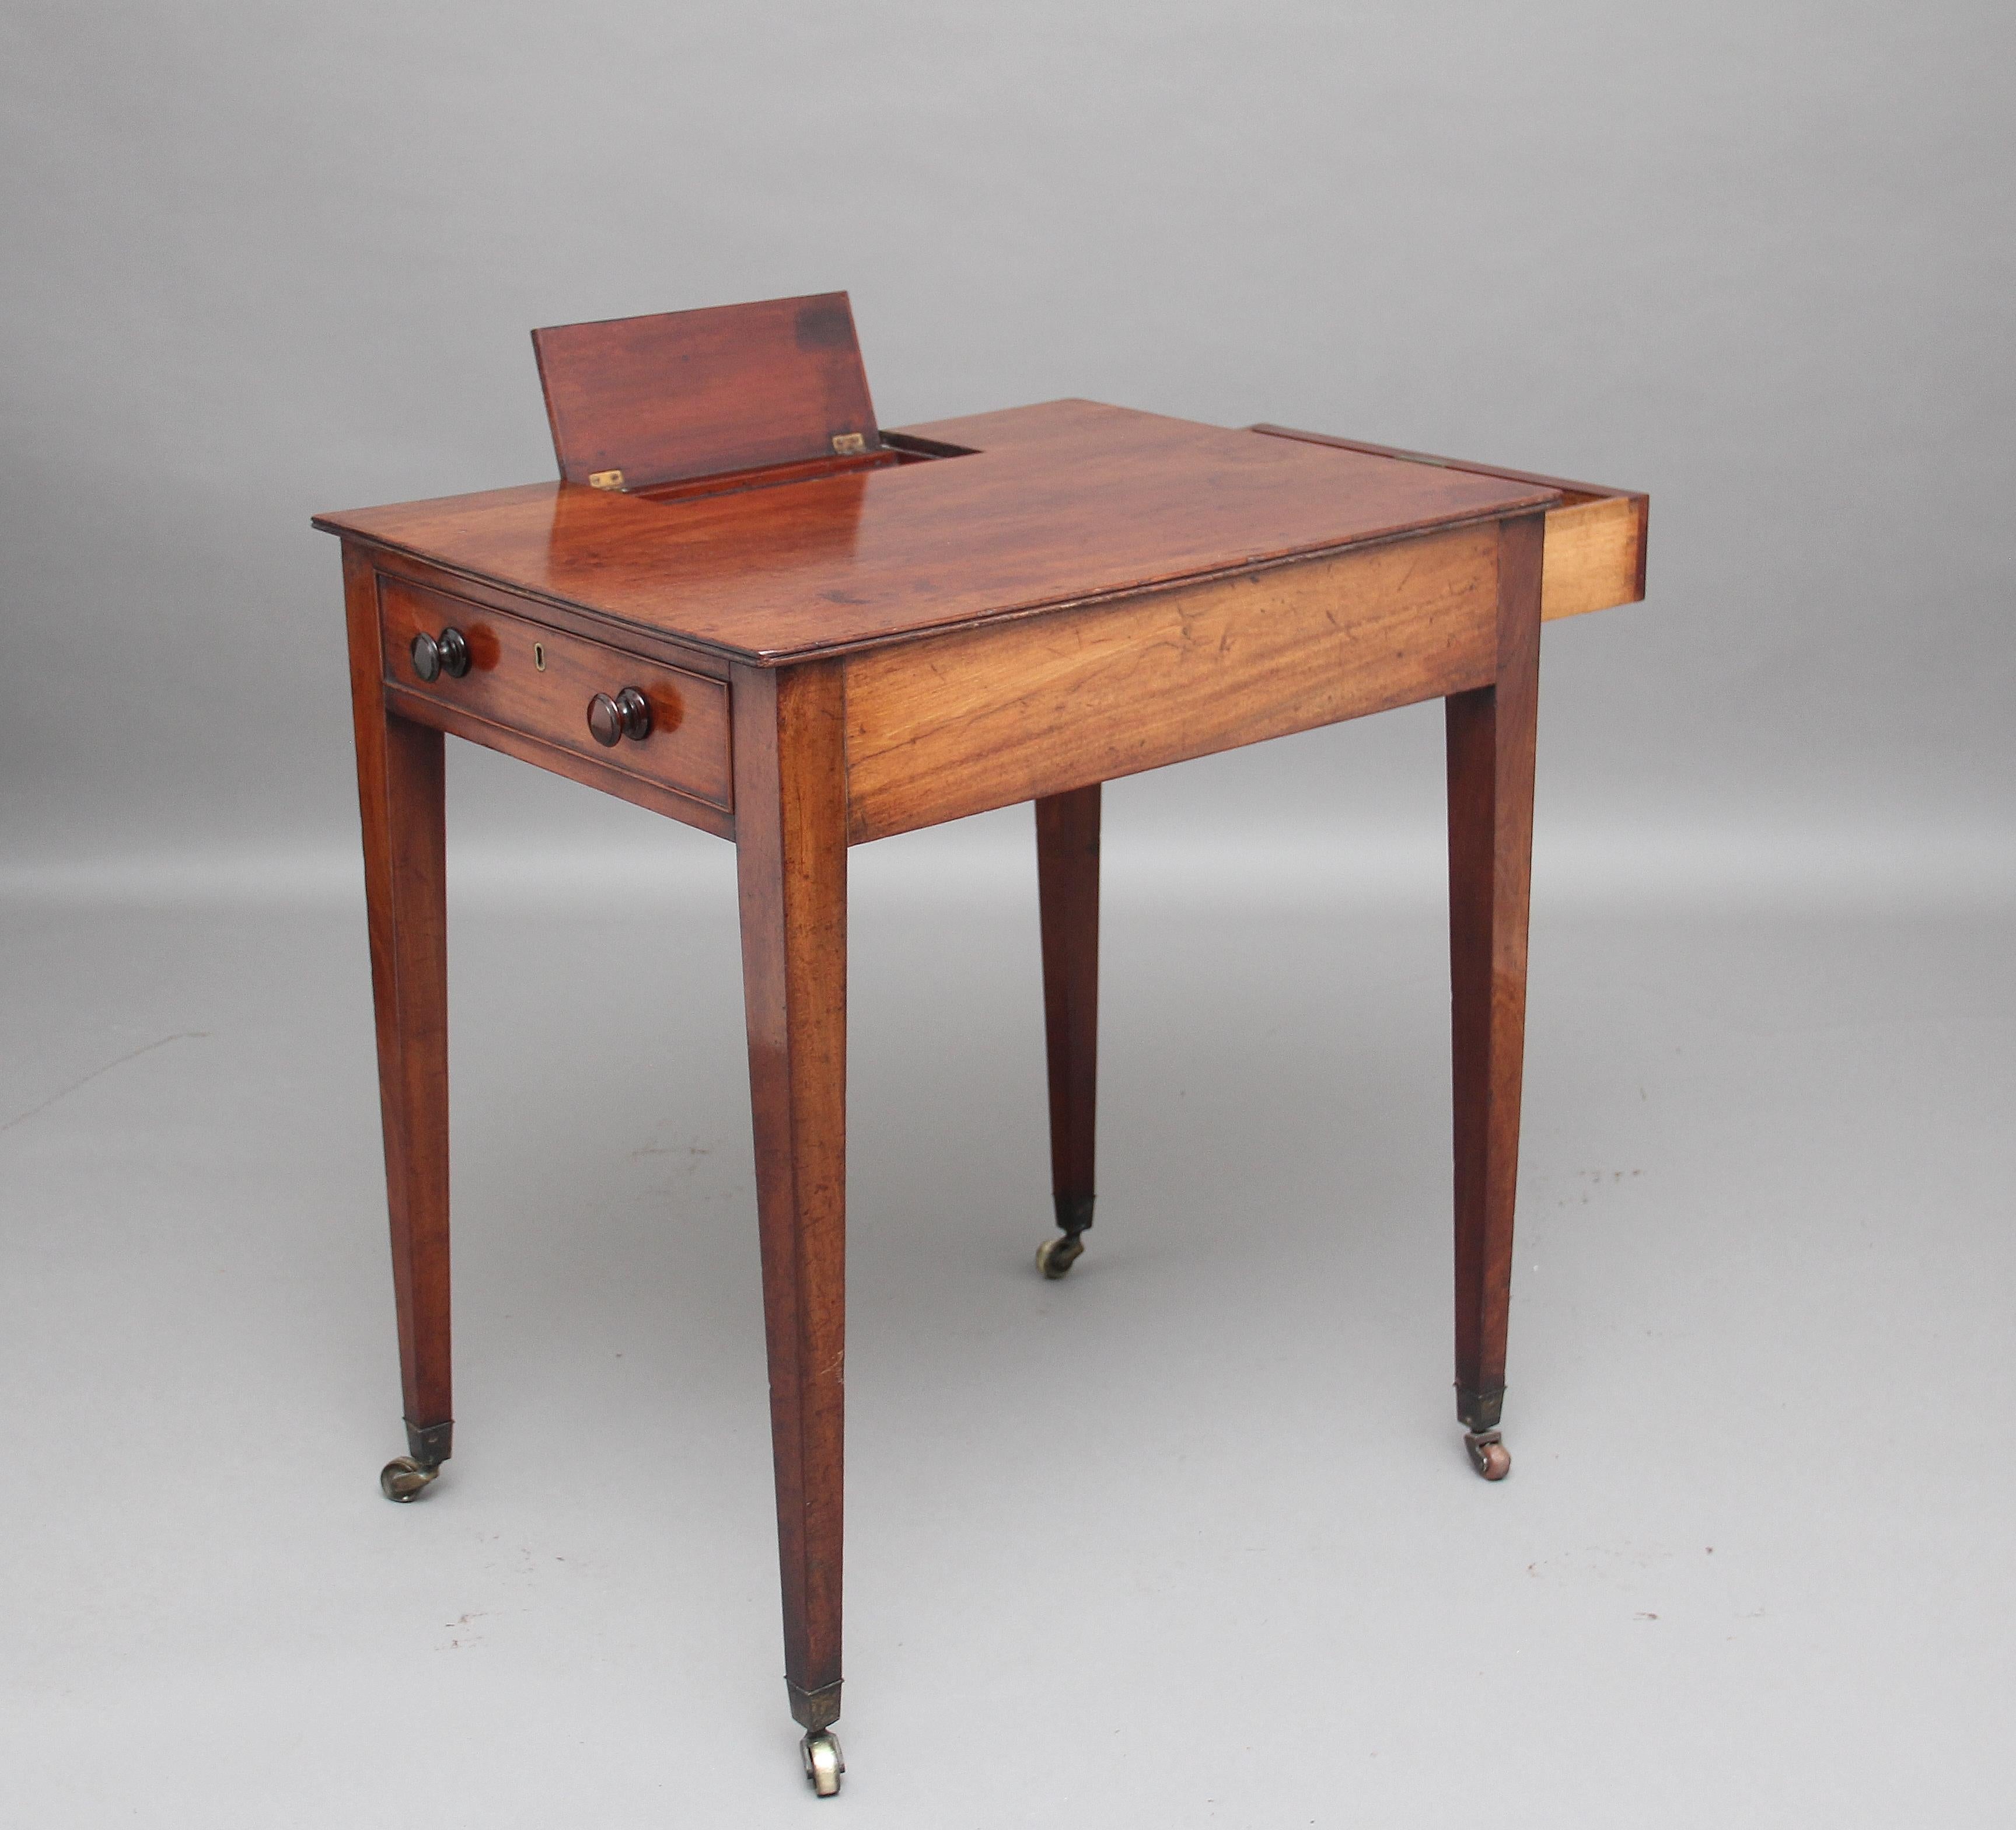 Early 19th century mahogany writing or side table on square tapered legs and castors, with a drawer on one end and a faux drawer on the other end, the top has a lift up flap to reveal a pen tray, two compartments for ink wells and another central